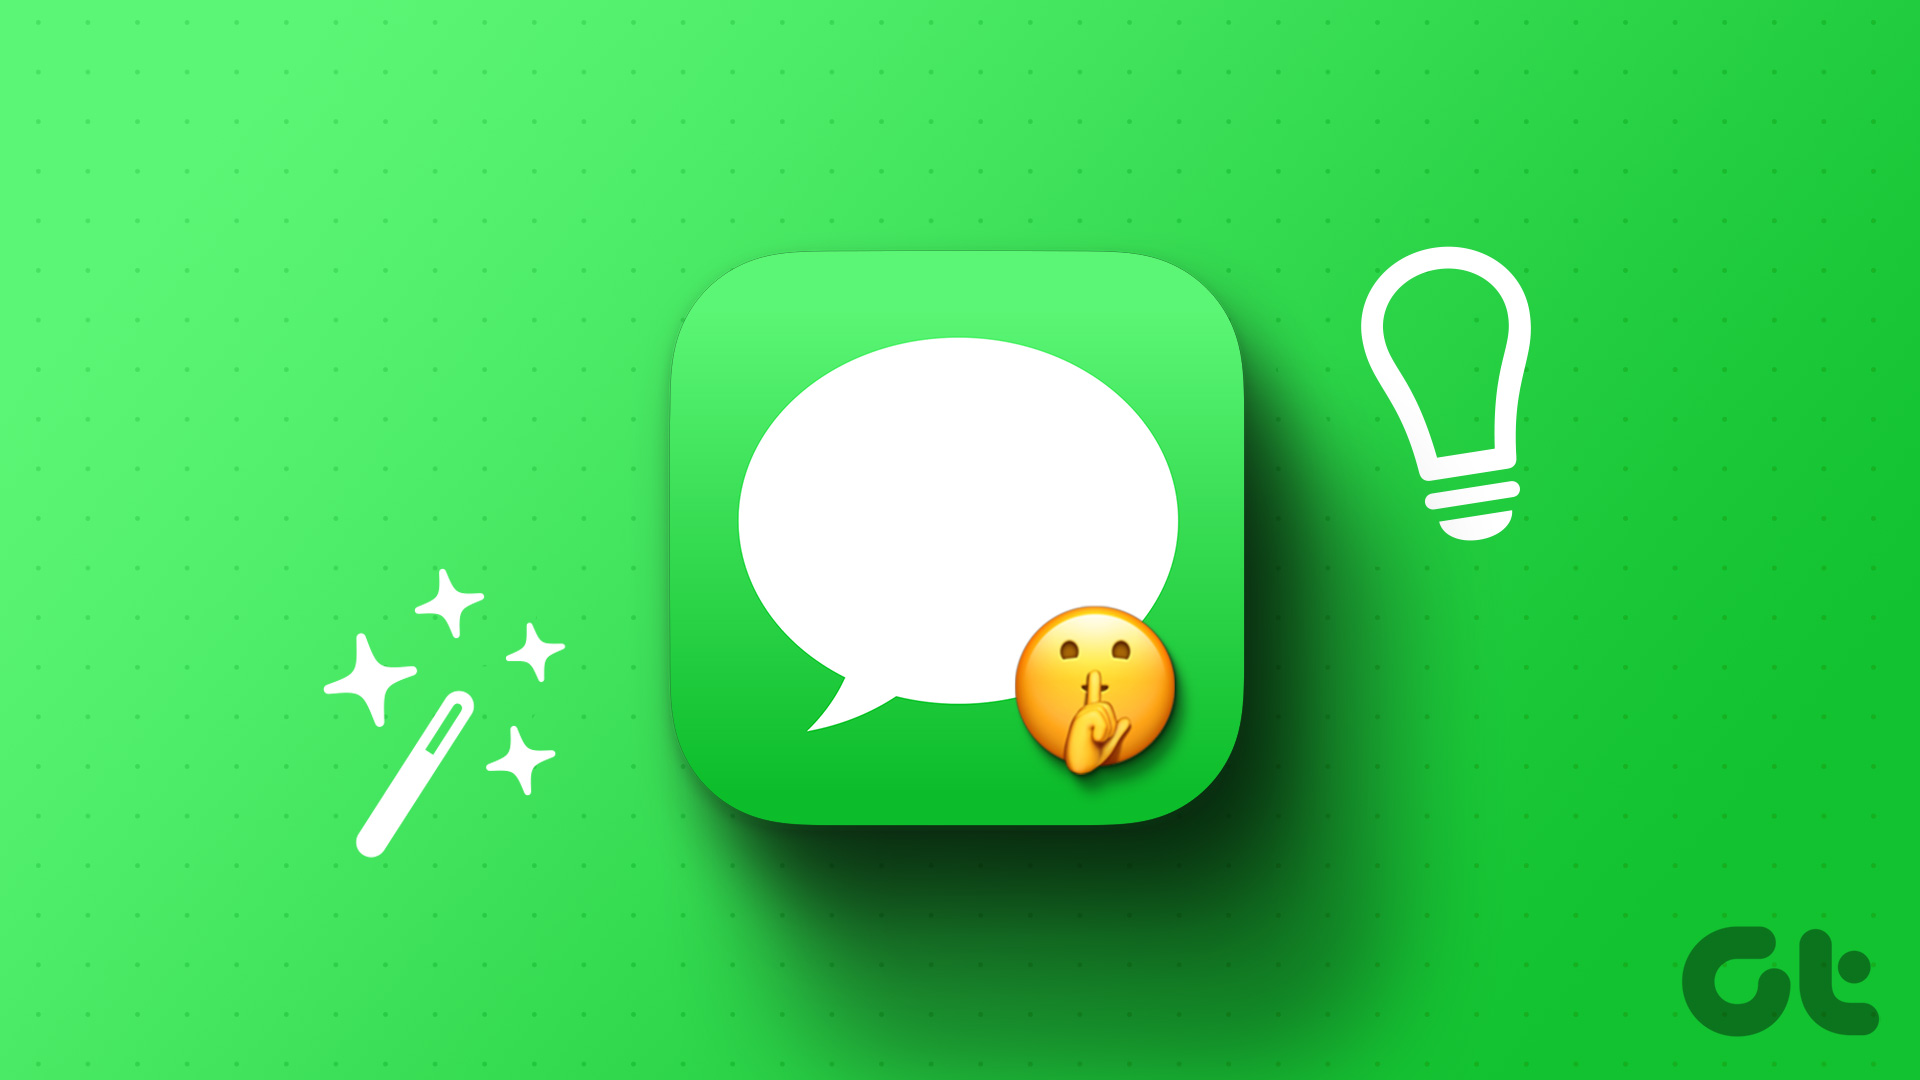 Tips and Tricks for iMessage